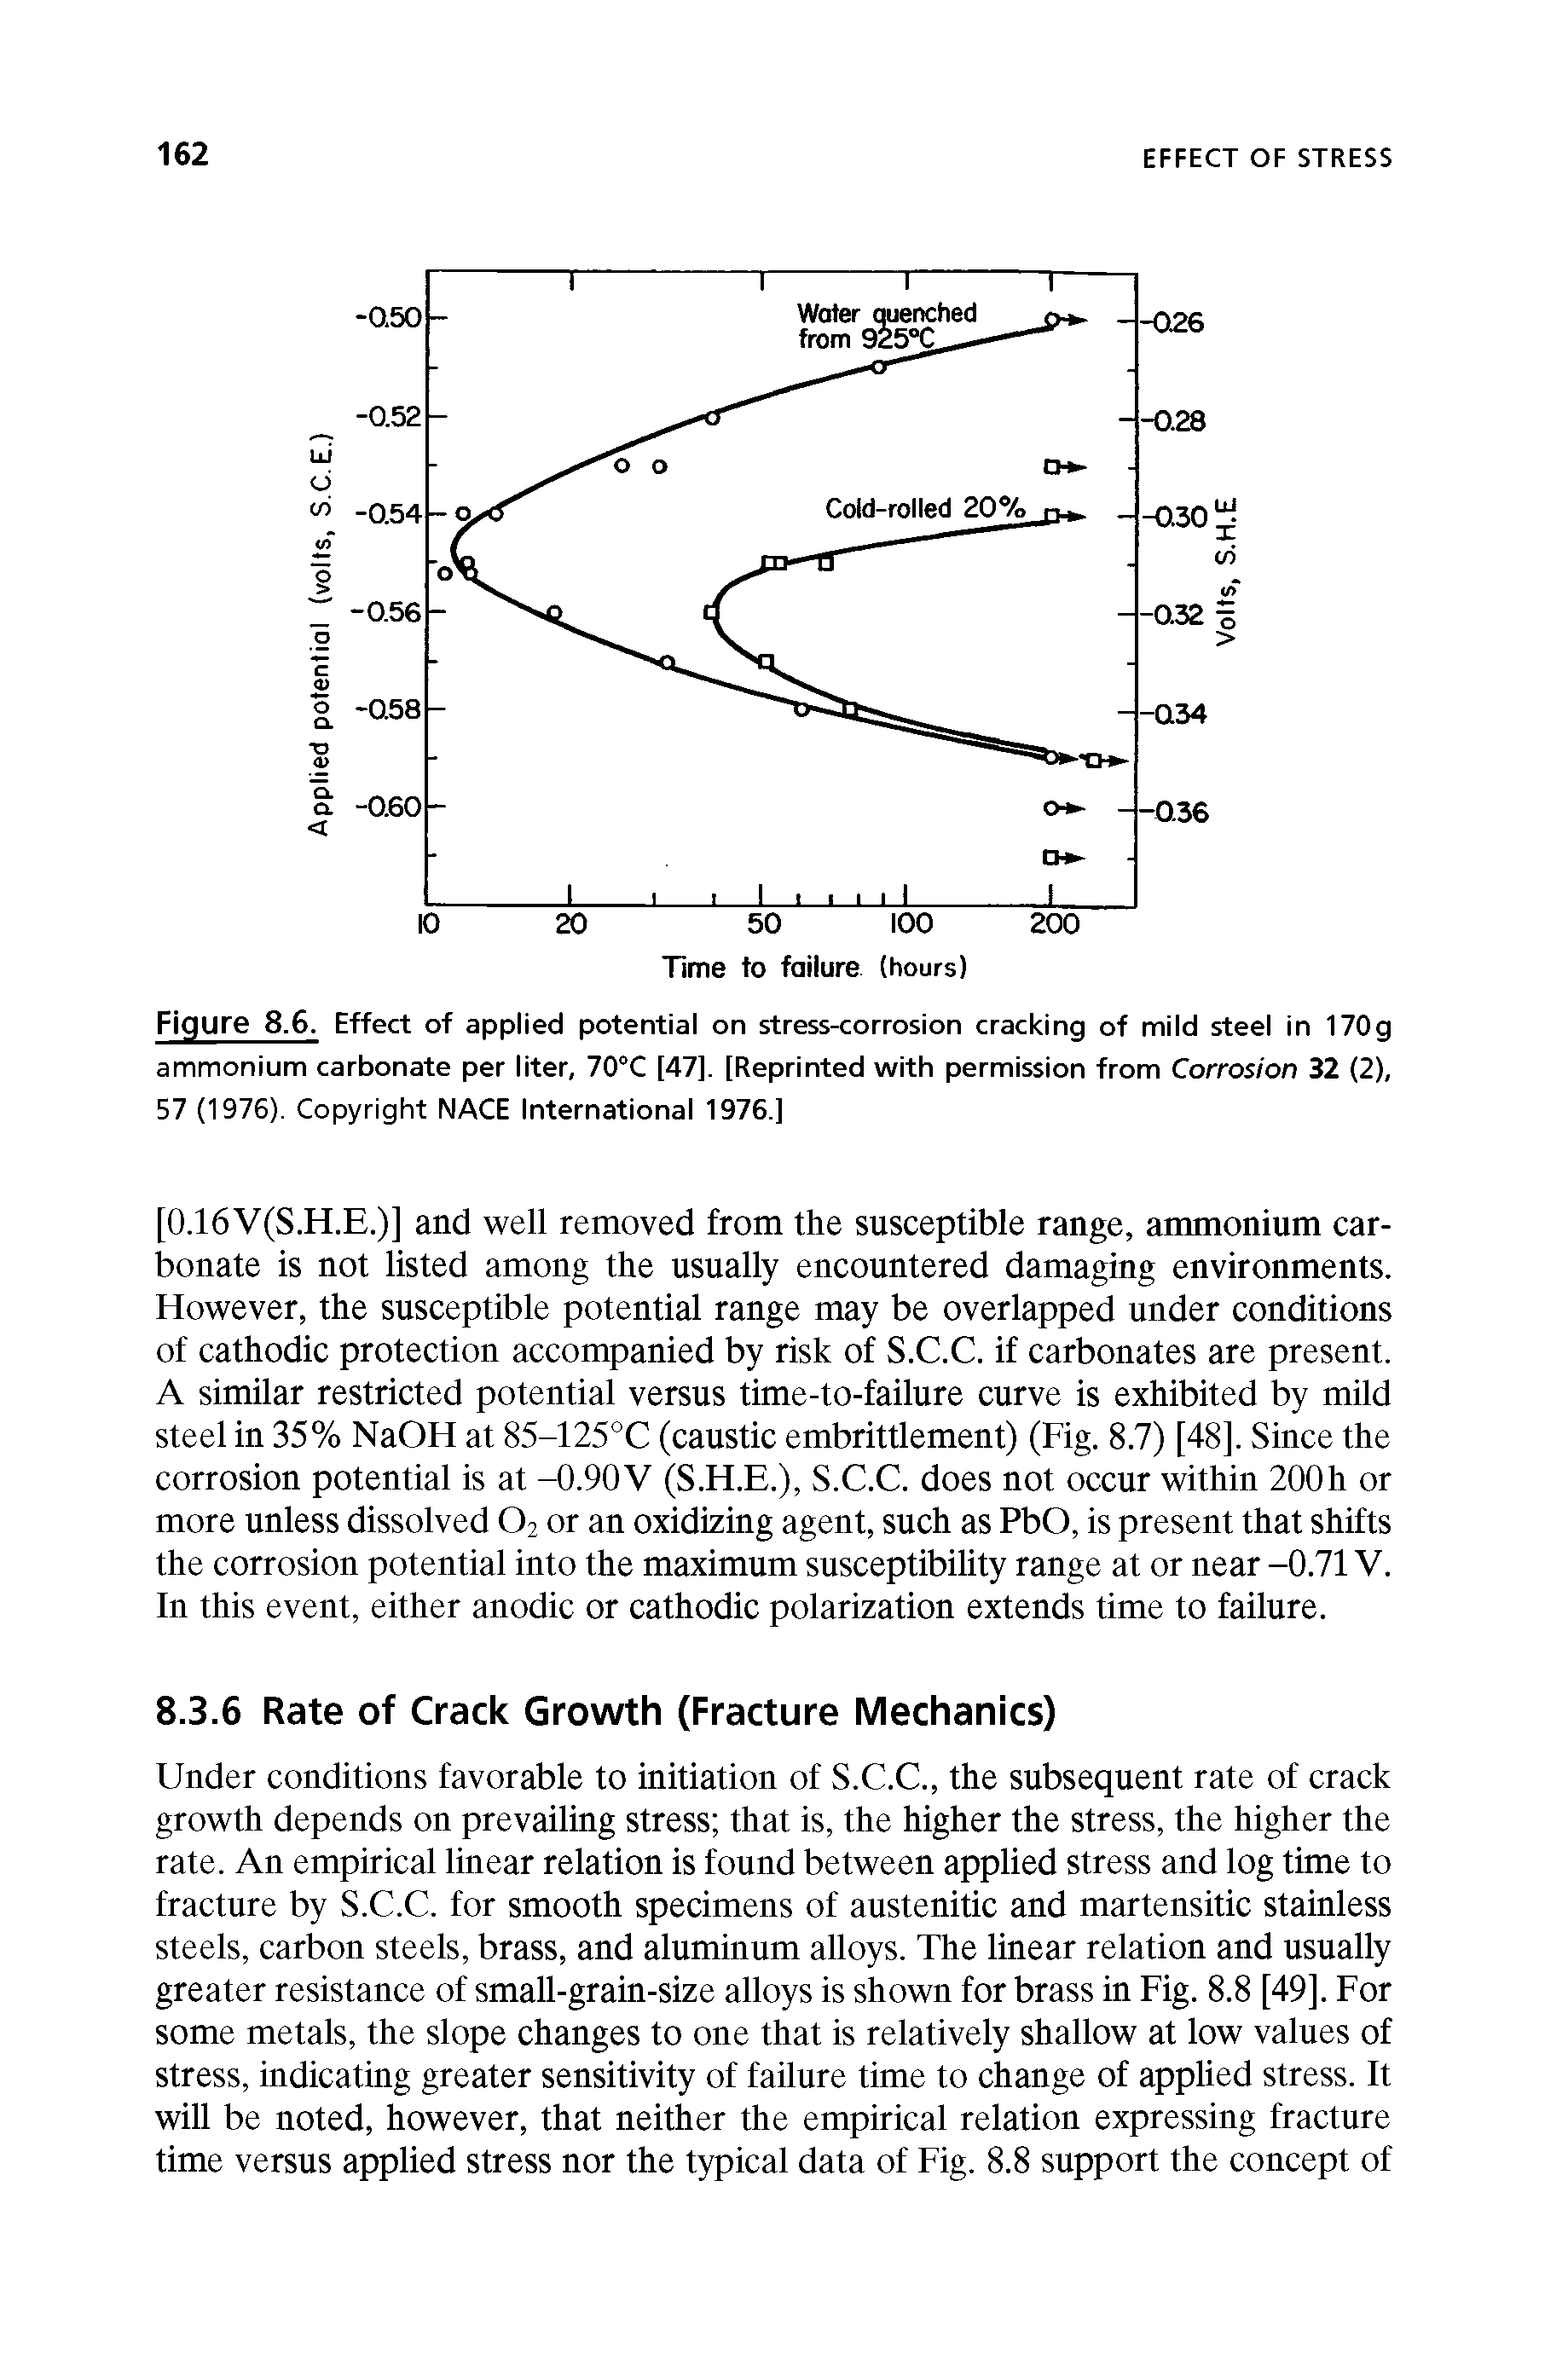 Figure 8.6. Effect of applied potential on stress<orrosion cracking of mild steel in 170g ammonium carbonate per liter, 70°C [47]. [Reprinted with permission from Corrosion 32 (2), 57 (1976). Copyright NACE International 1976.]...